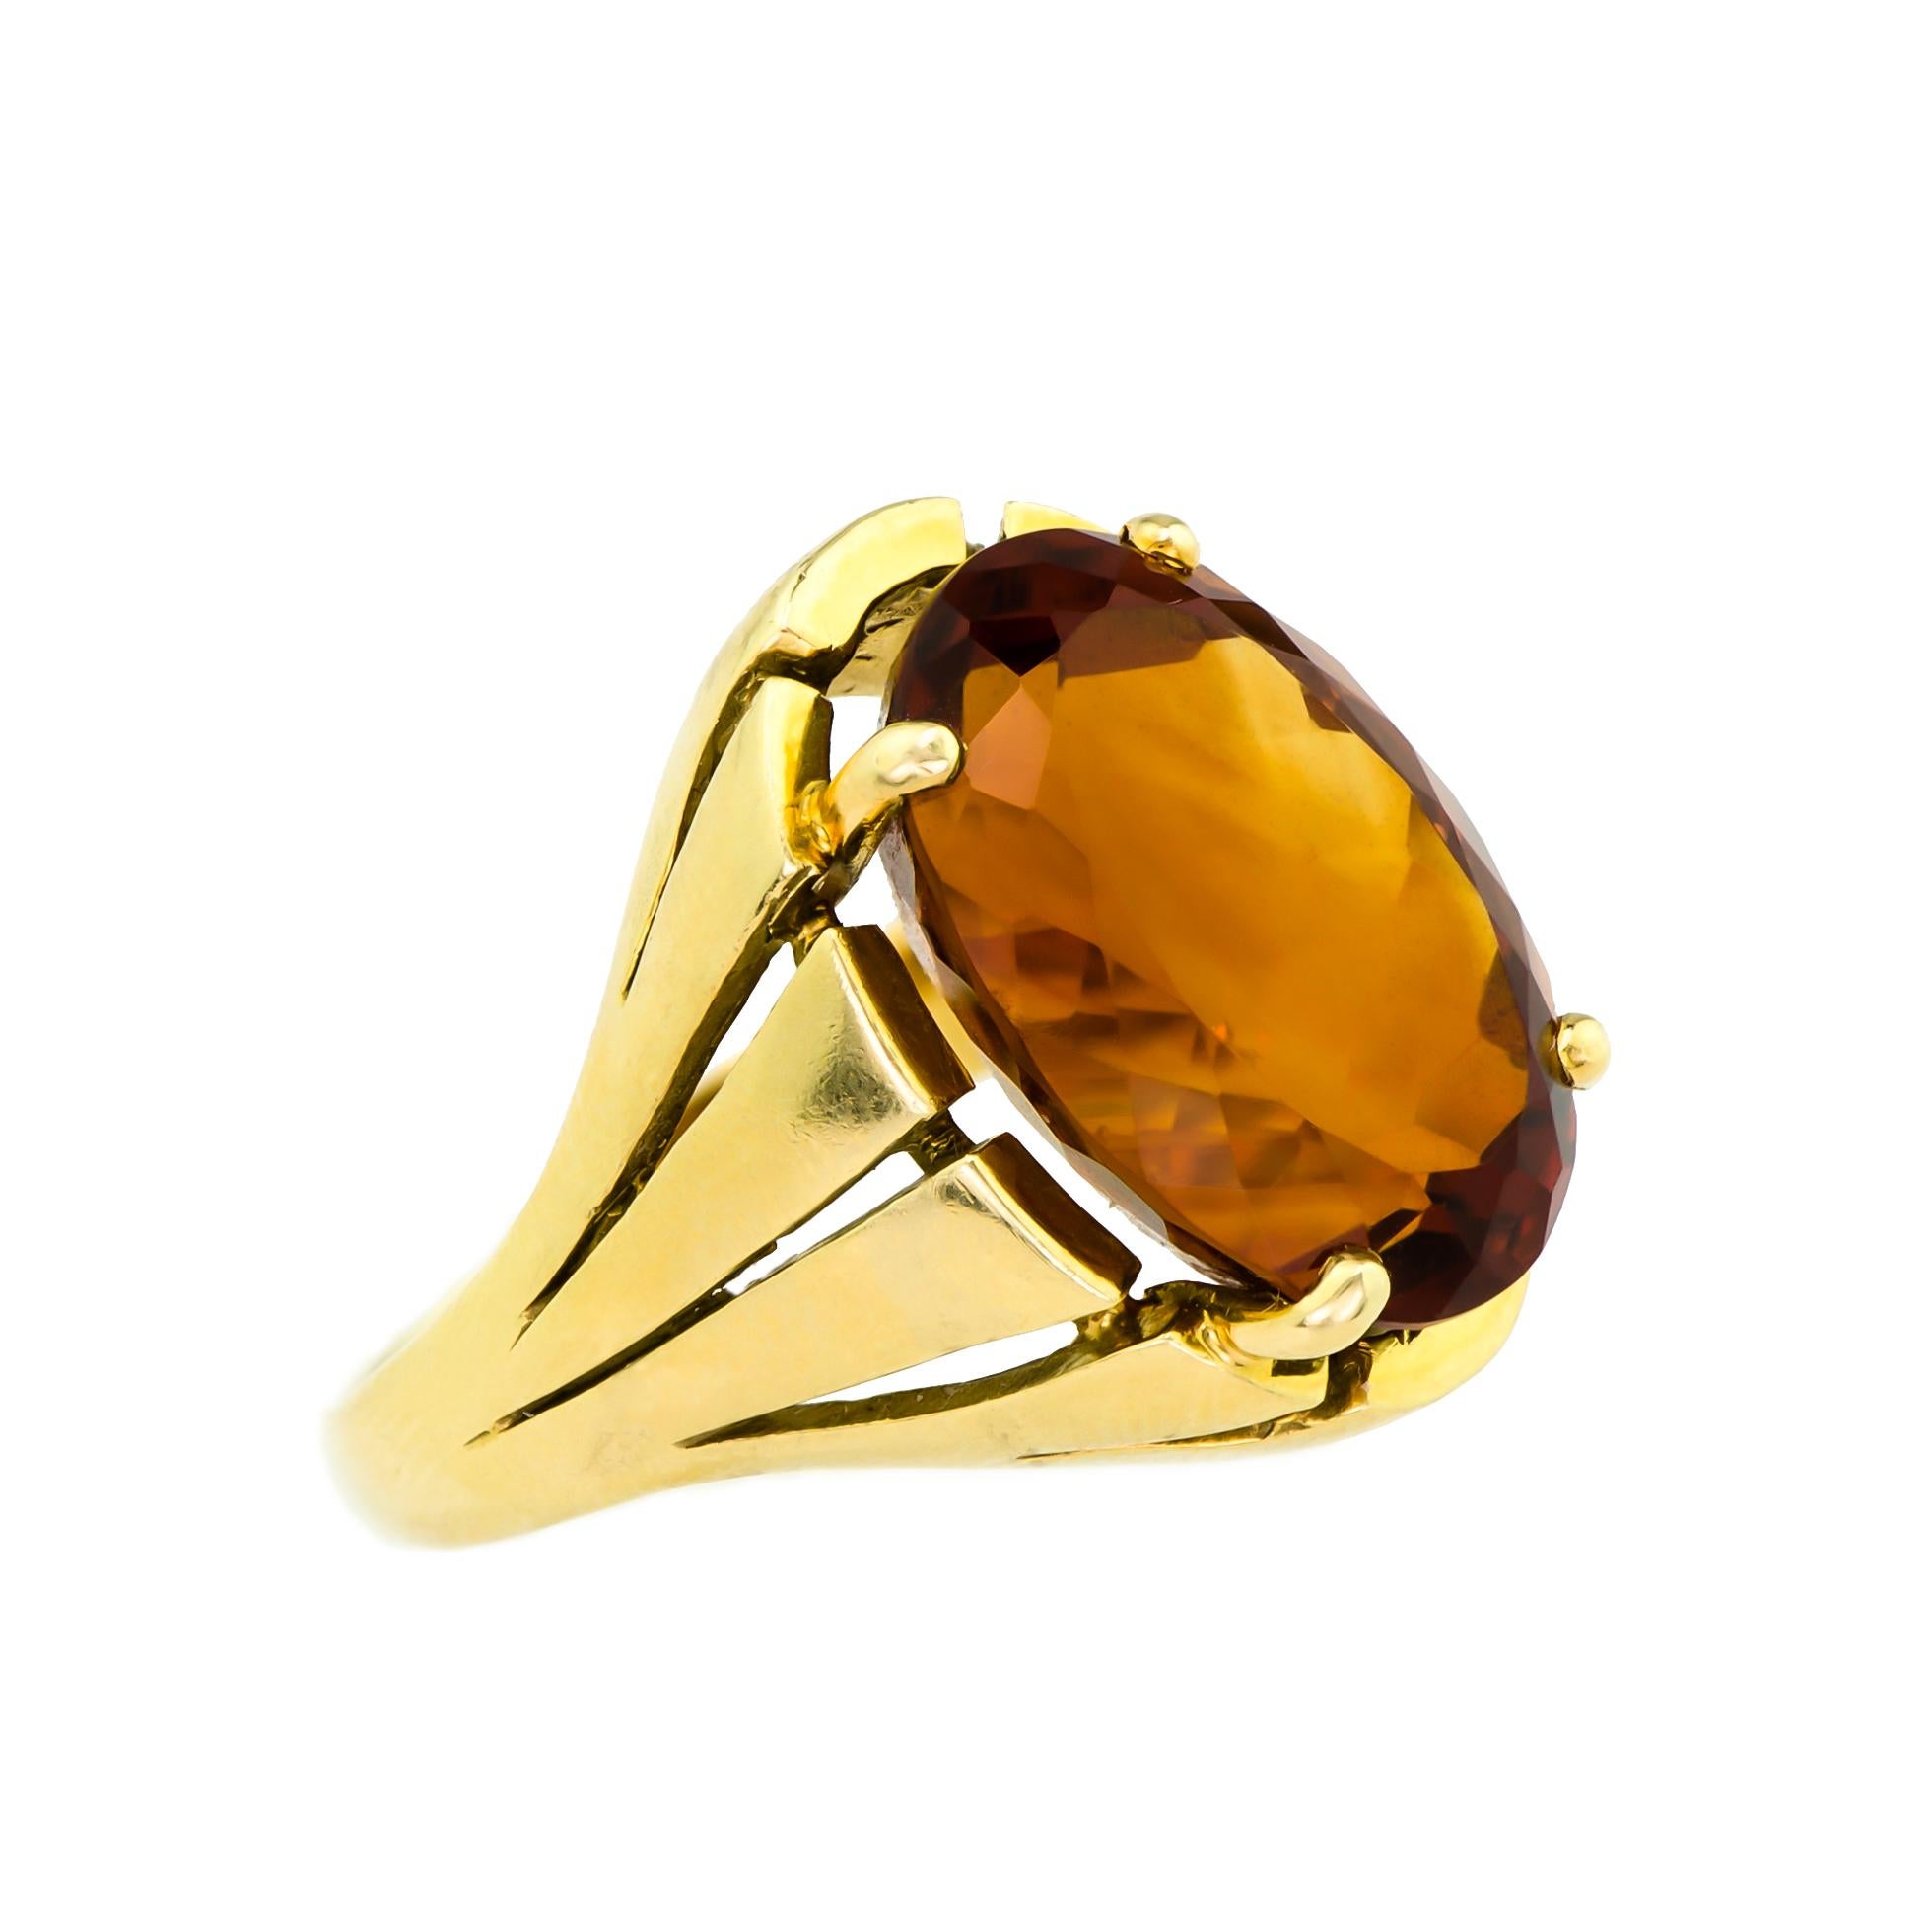 Brilliant Cut Vintage 18kt Yellow Gold and Citrine Cocktail Ring For Sale